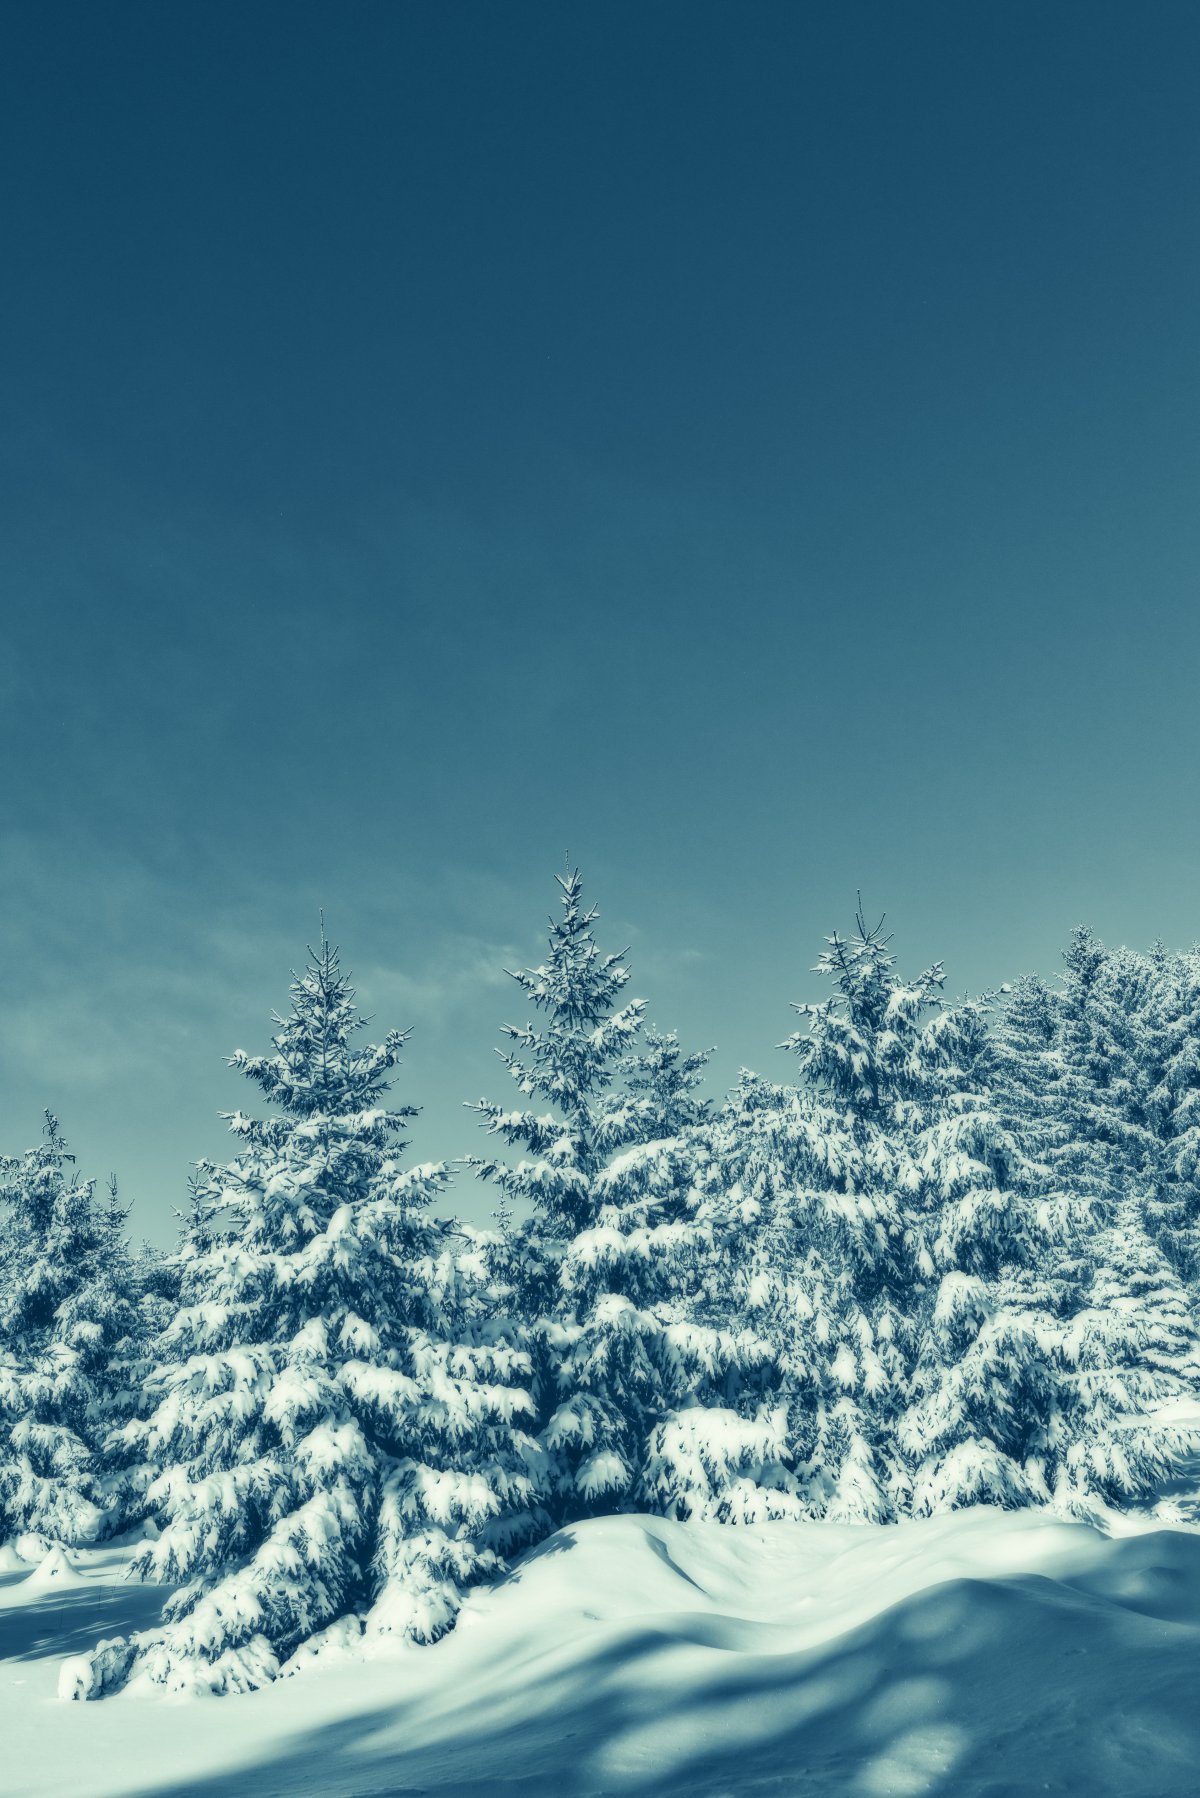 Pictures of snowy scenery with blue sky and woods